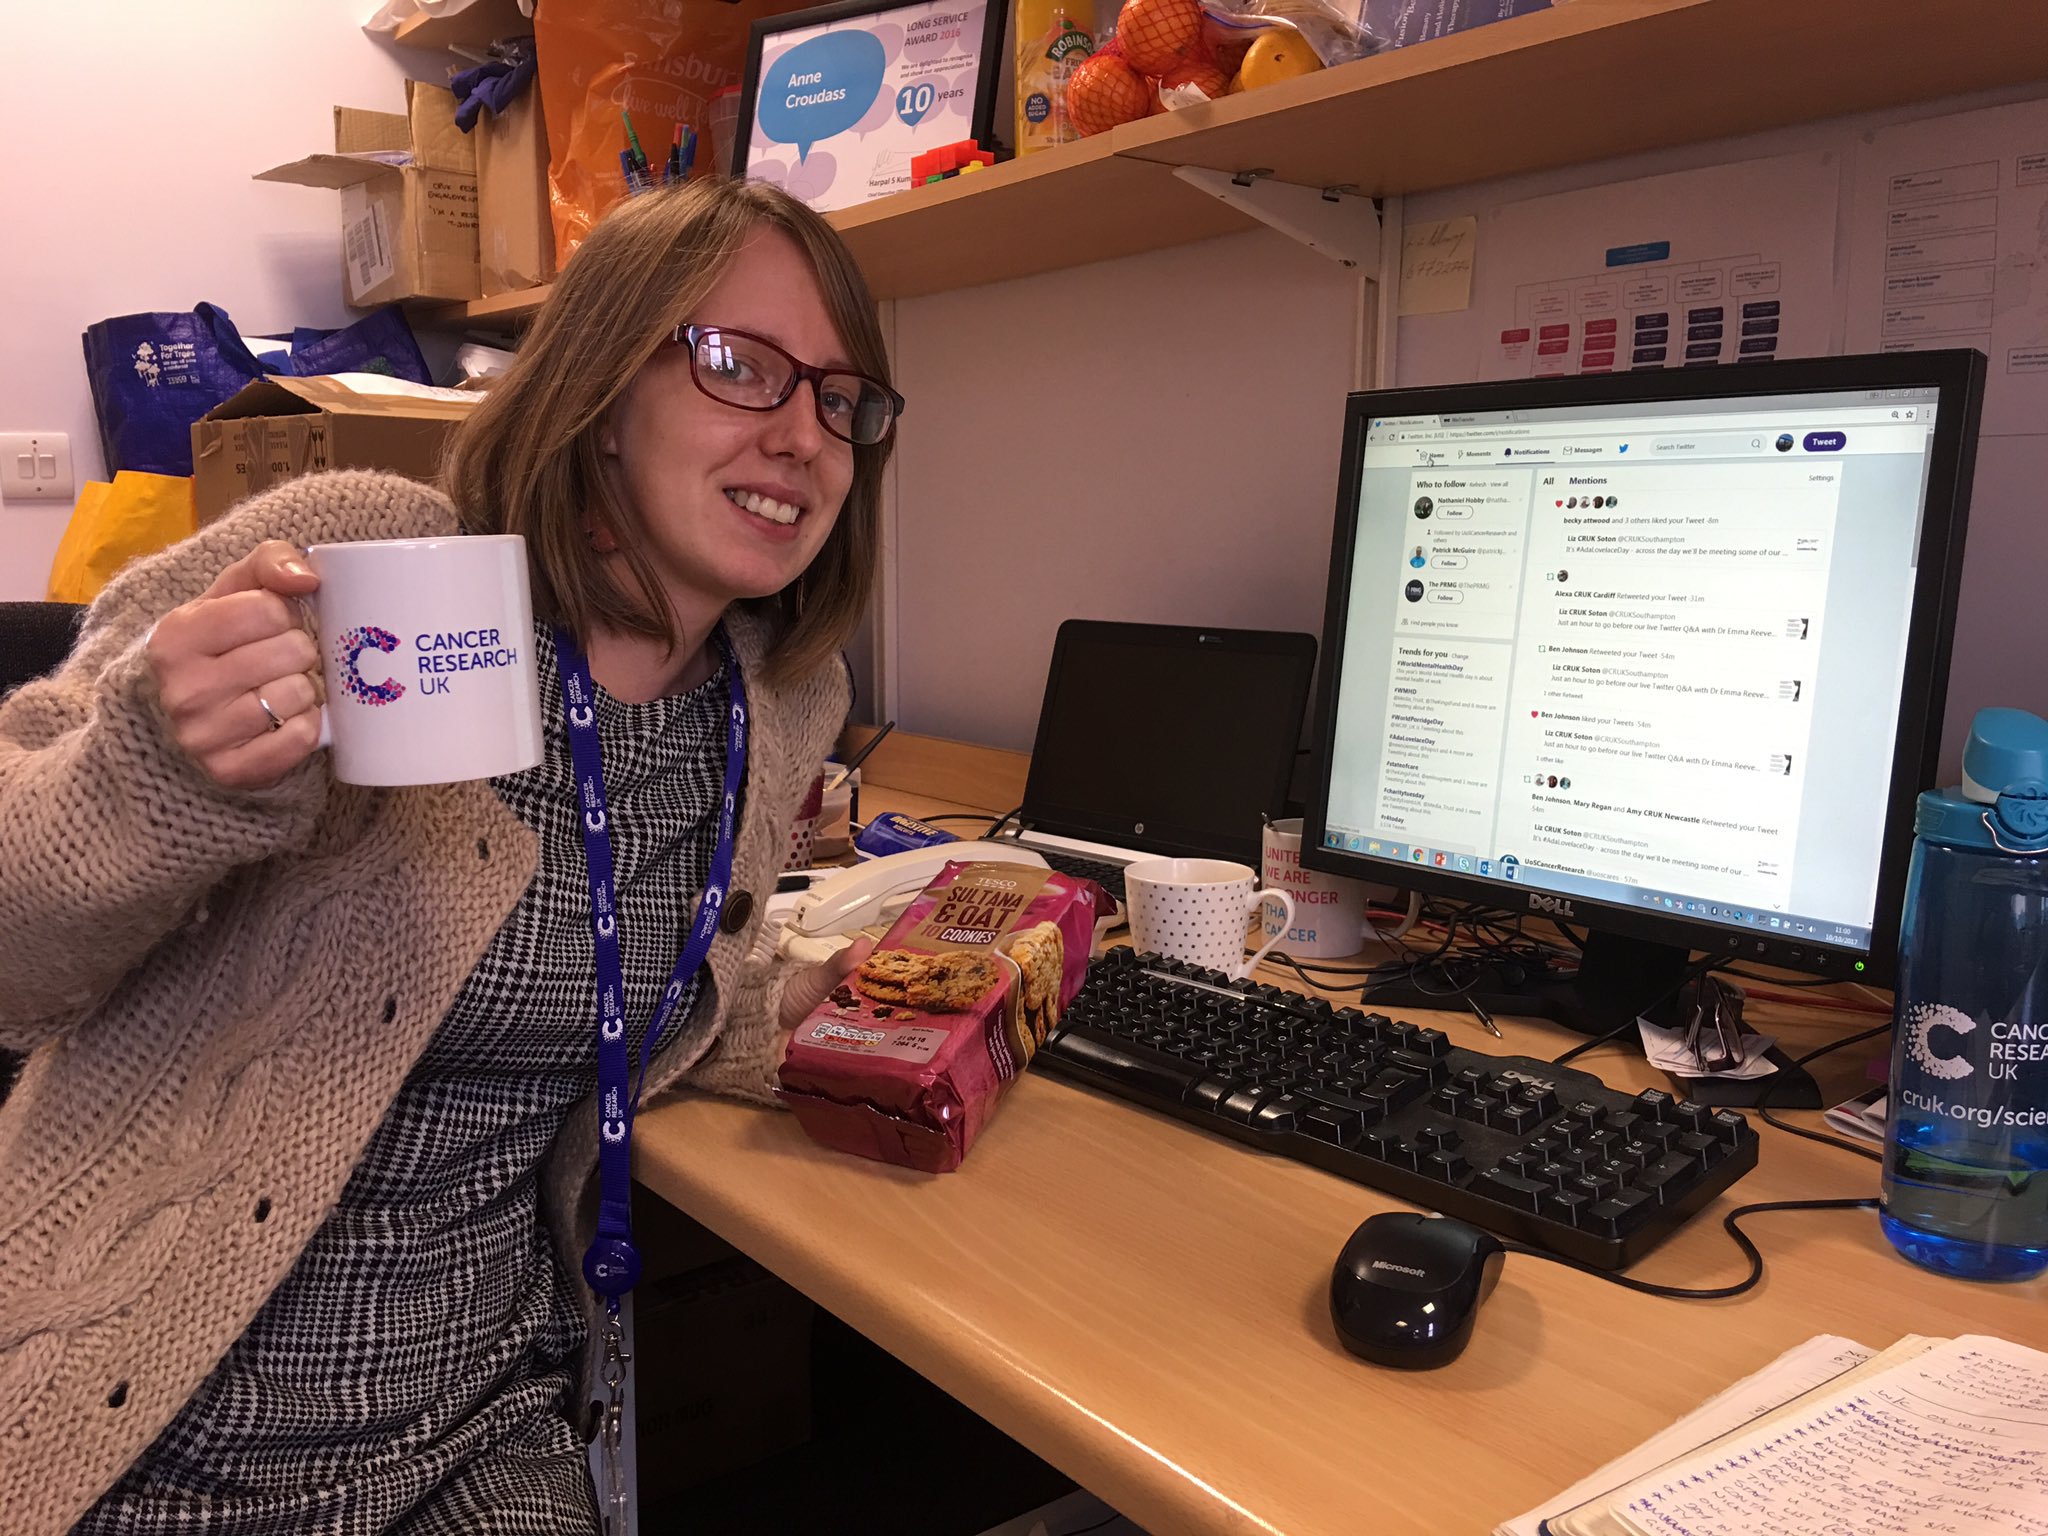 Tea ☑️ Biscuits ☑️ Dr Emma is ready to answer your questions for #AdaLovelaceDay #ALD17 #AskEmma https://t.co/QthmaQHDxp